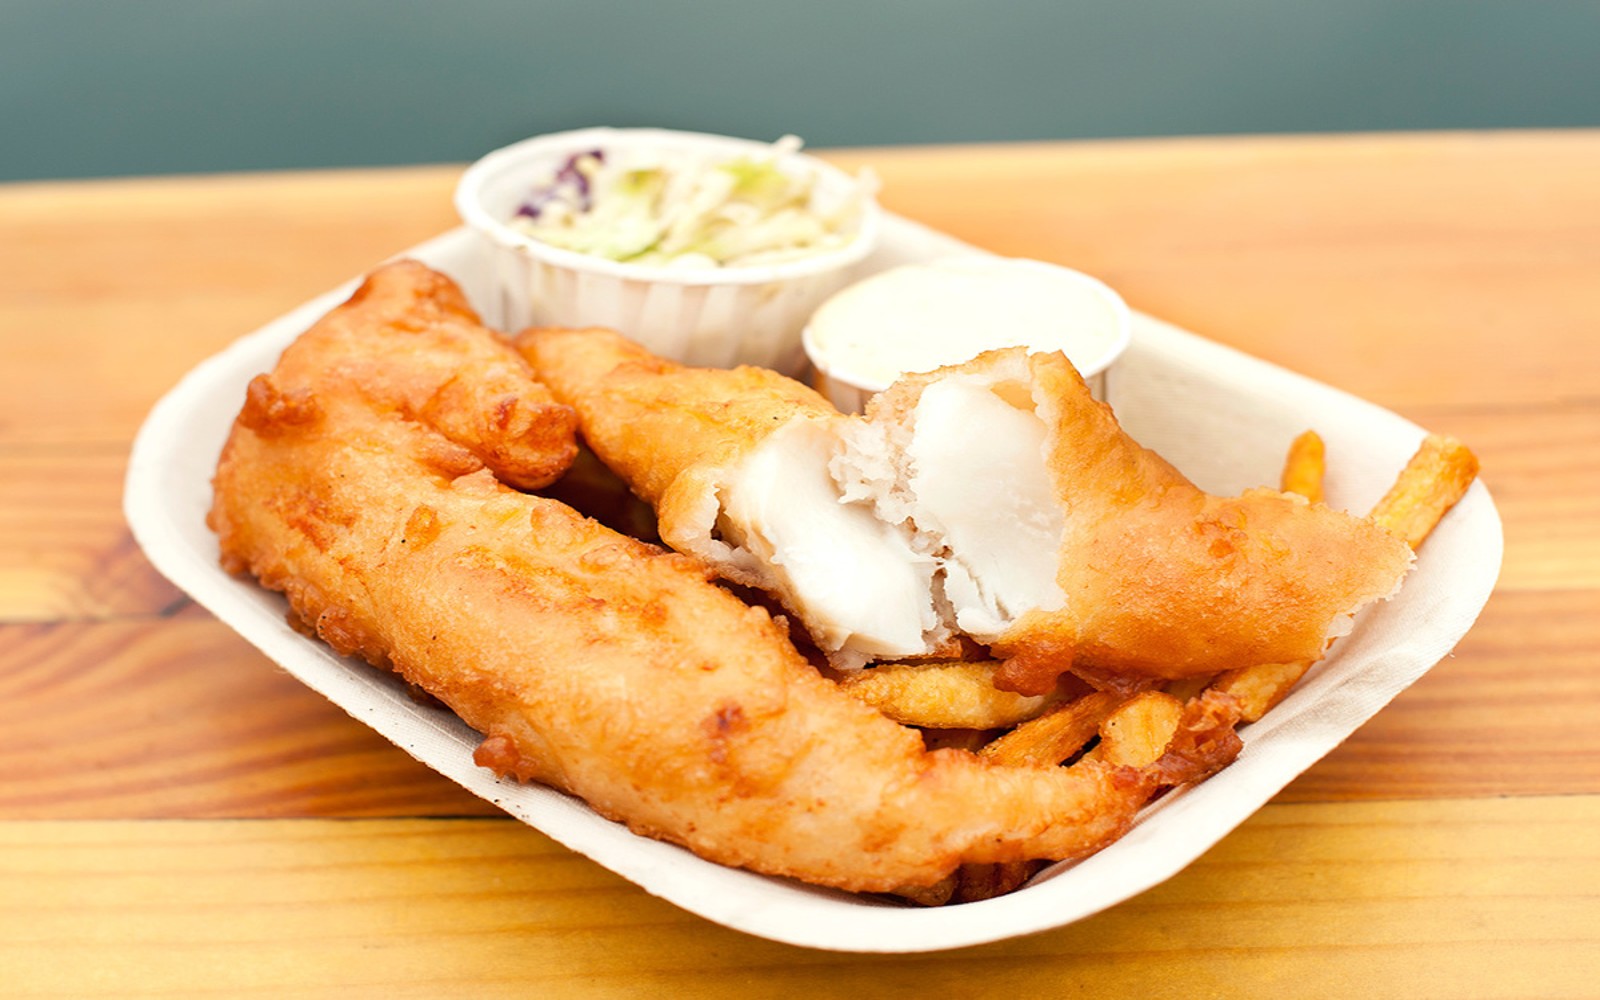 Fish and chips from Redfish Bluefish, Victoria BC